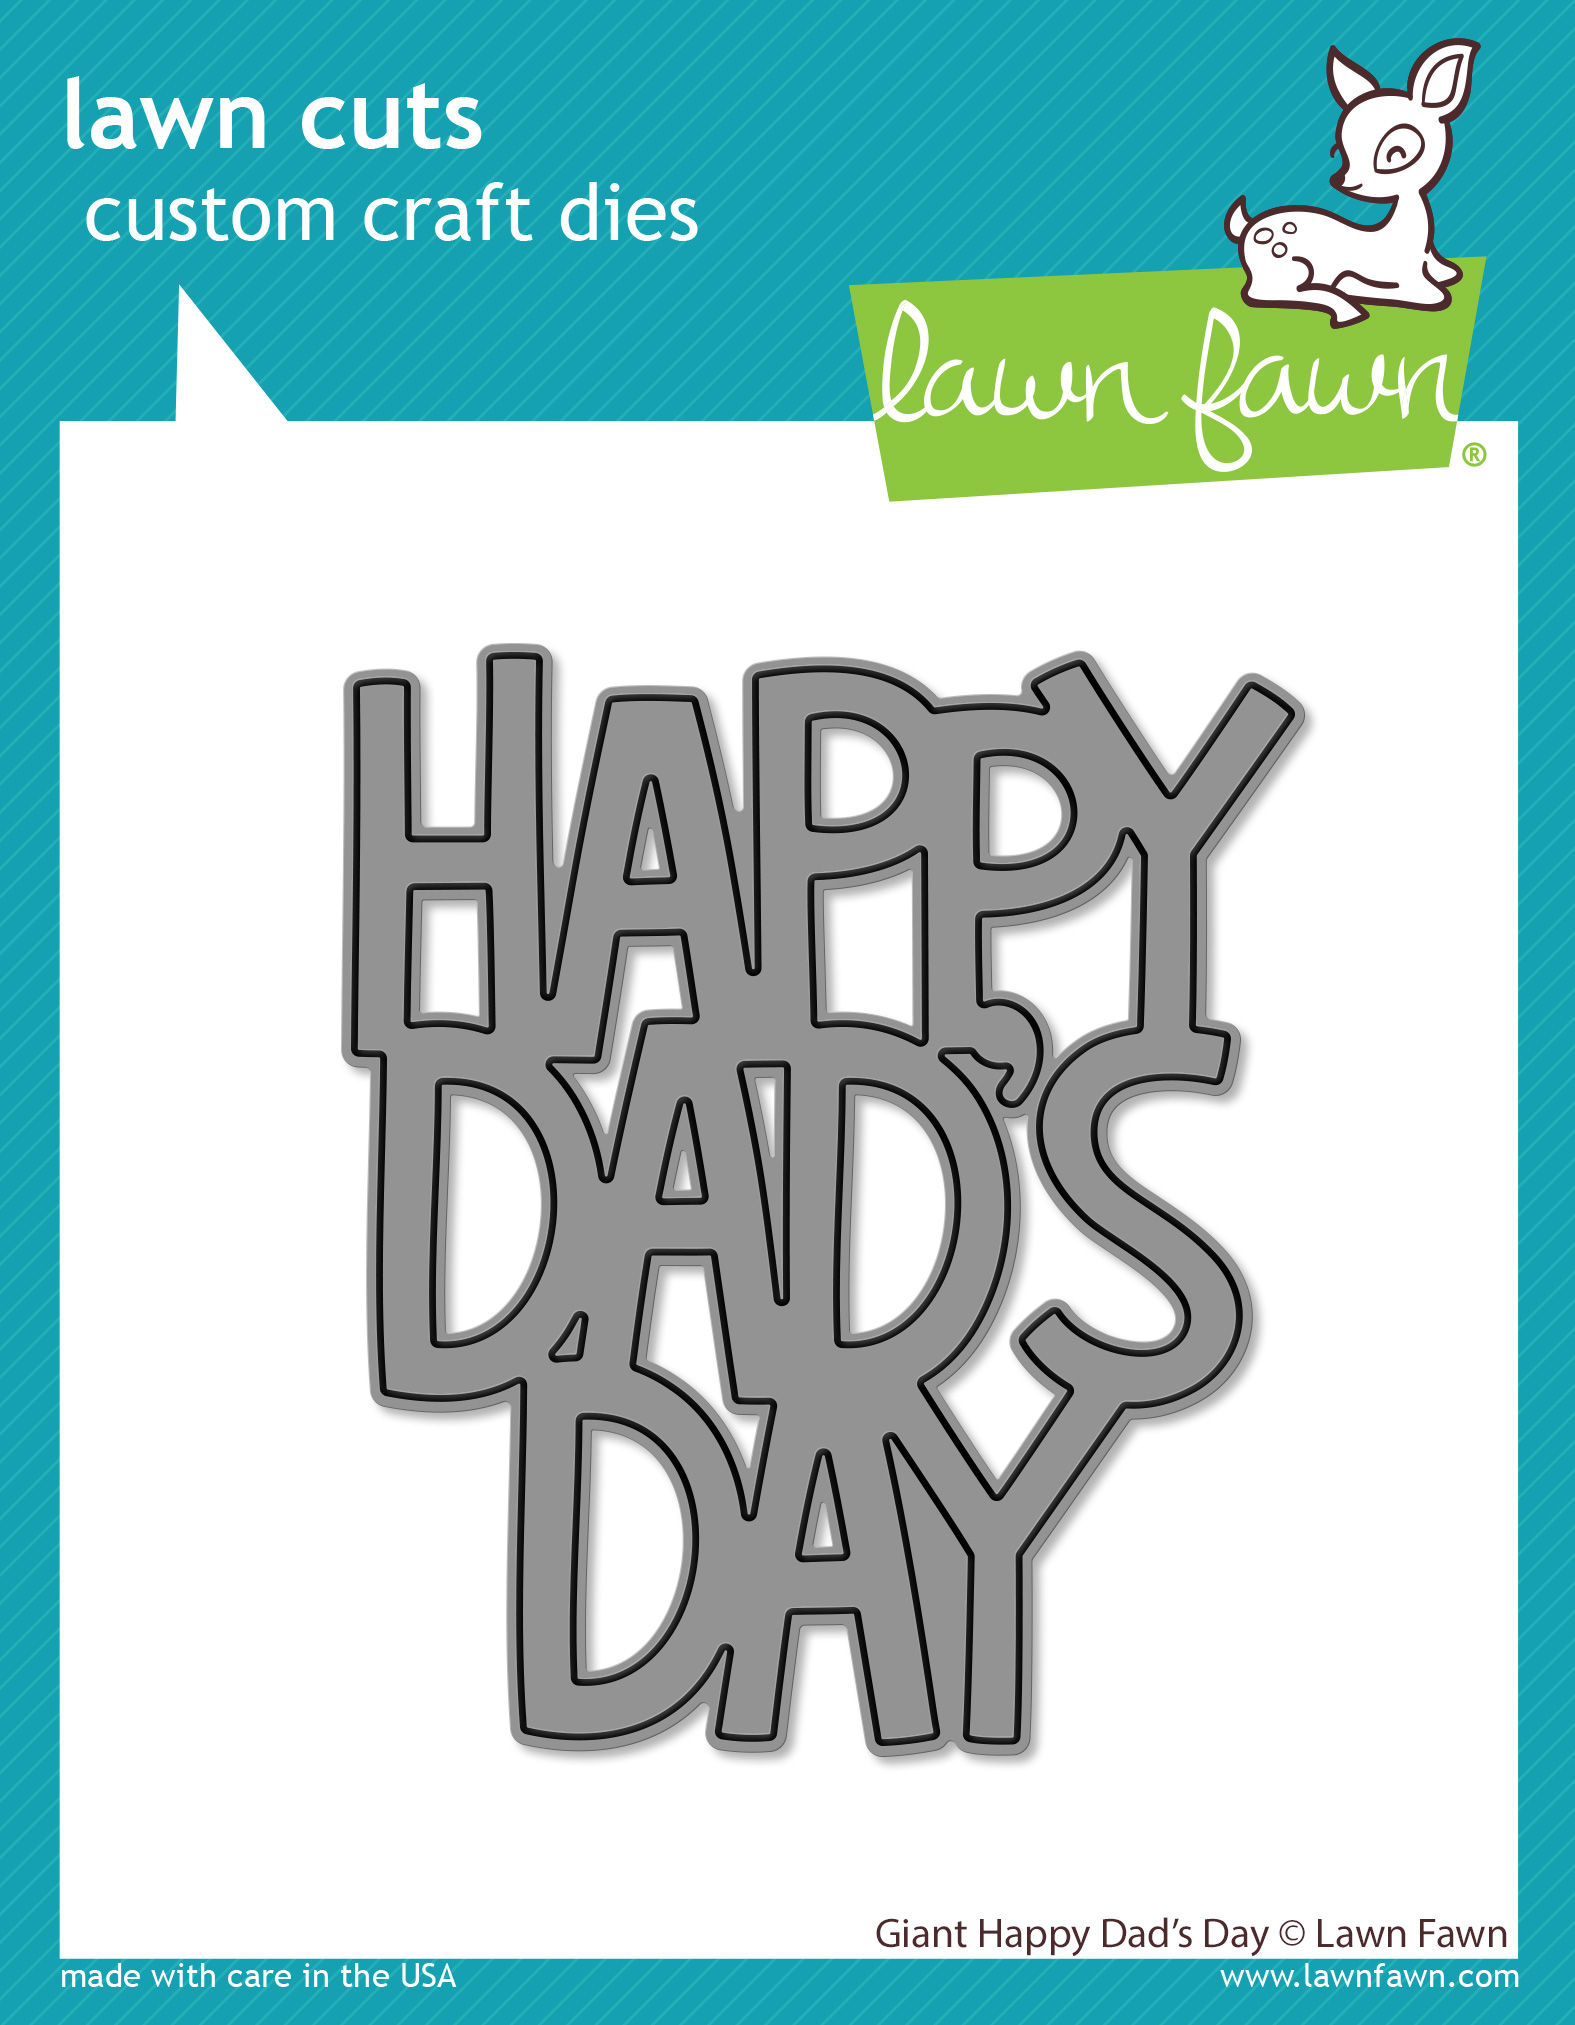 Giant Happy Dad's Day